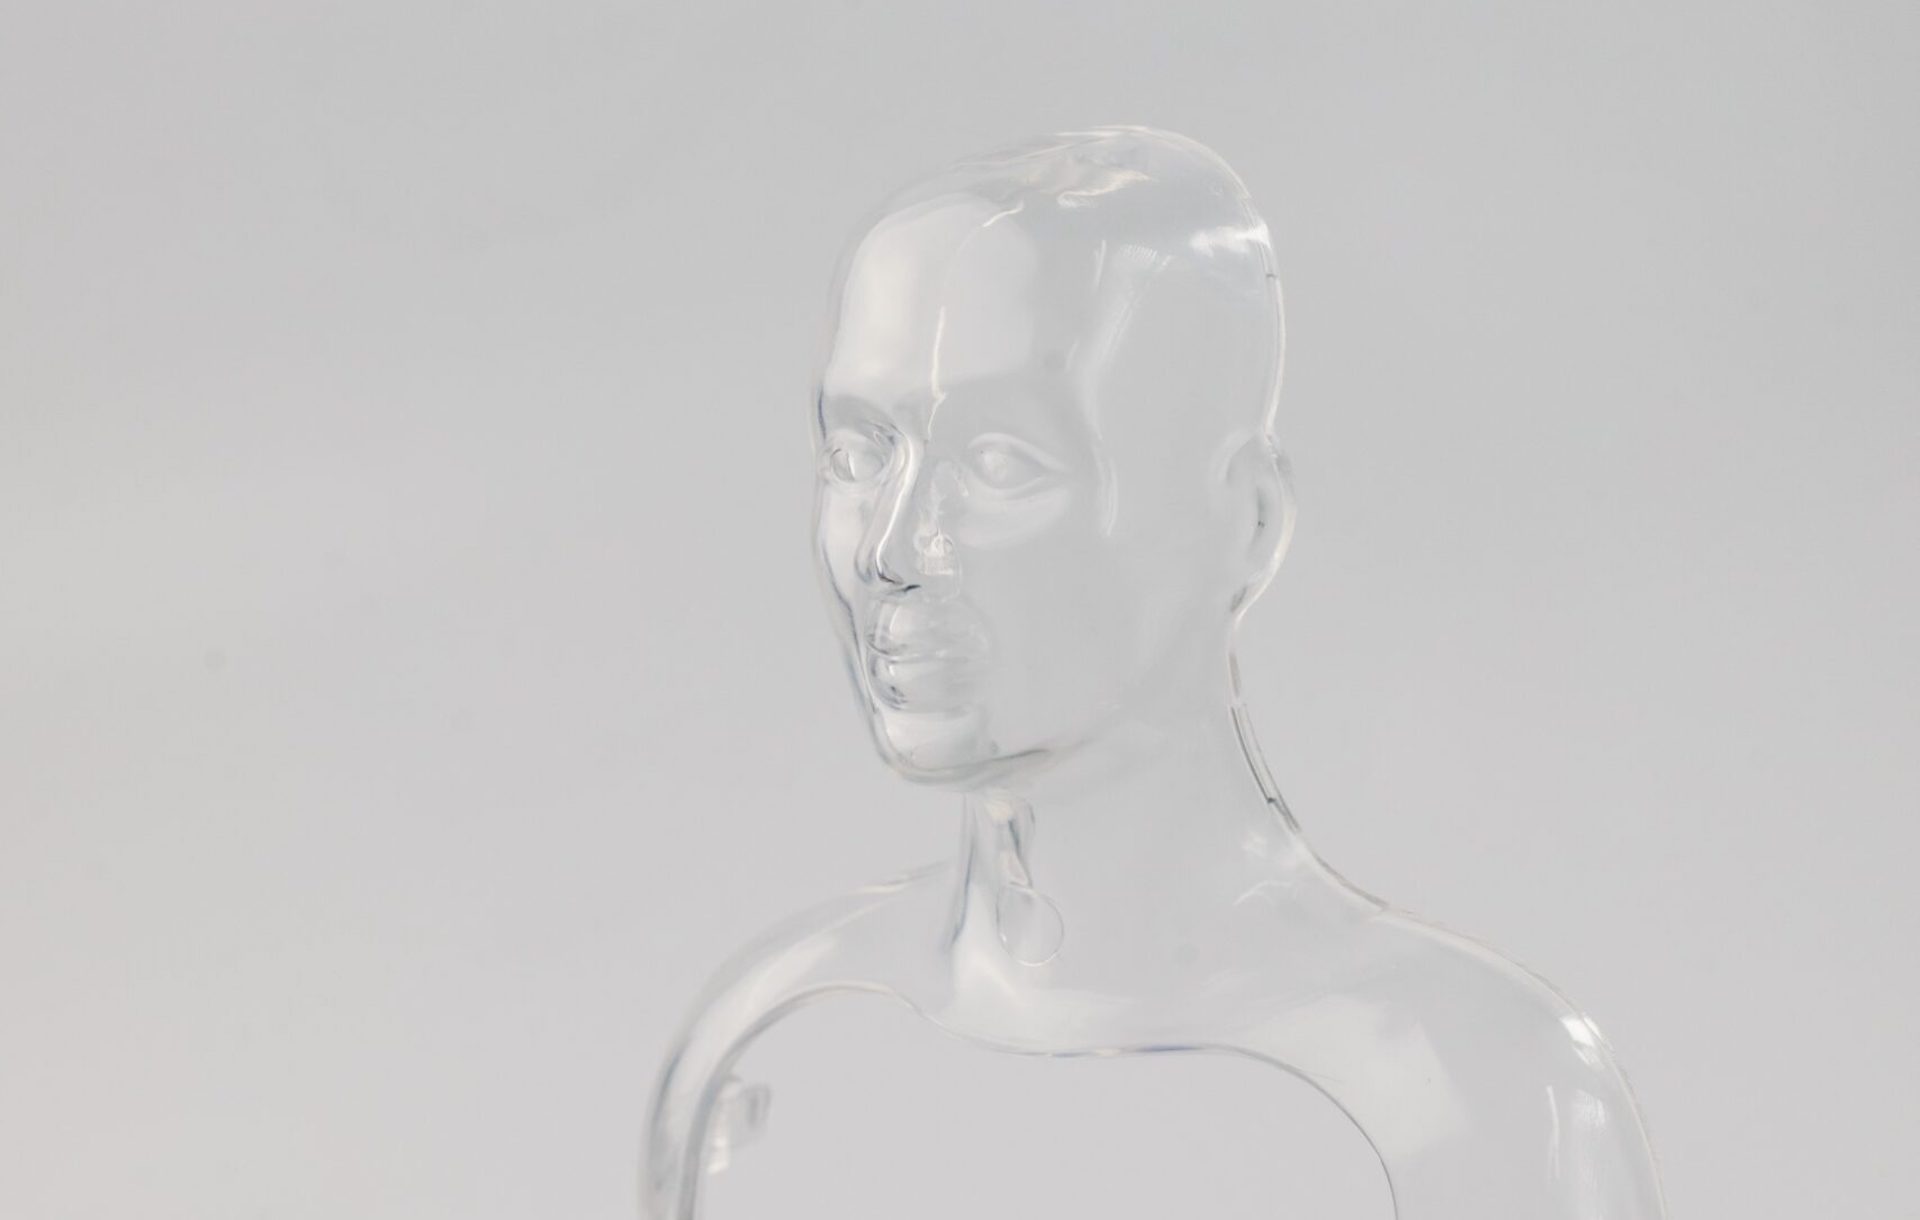 Image of a clear plastic mould of a human face and shoulders, on a white background.